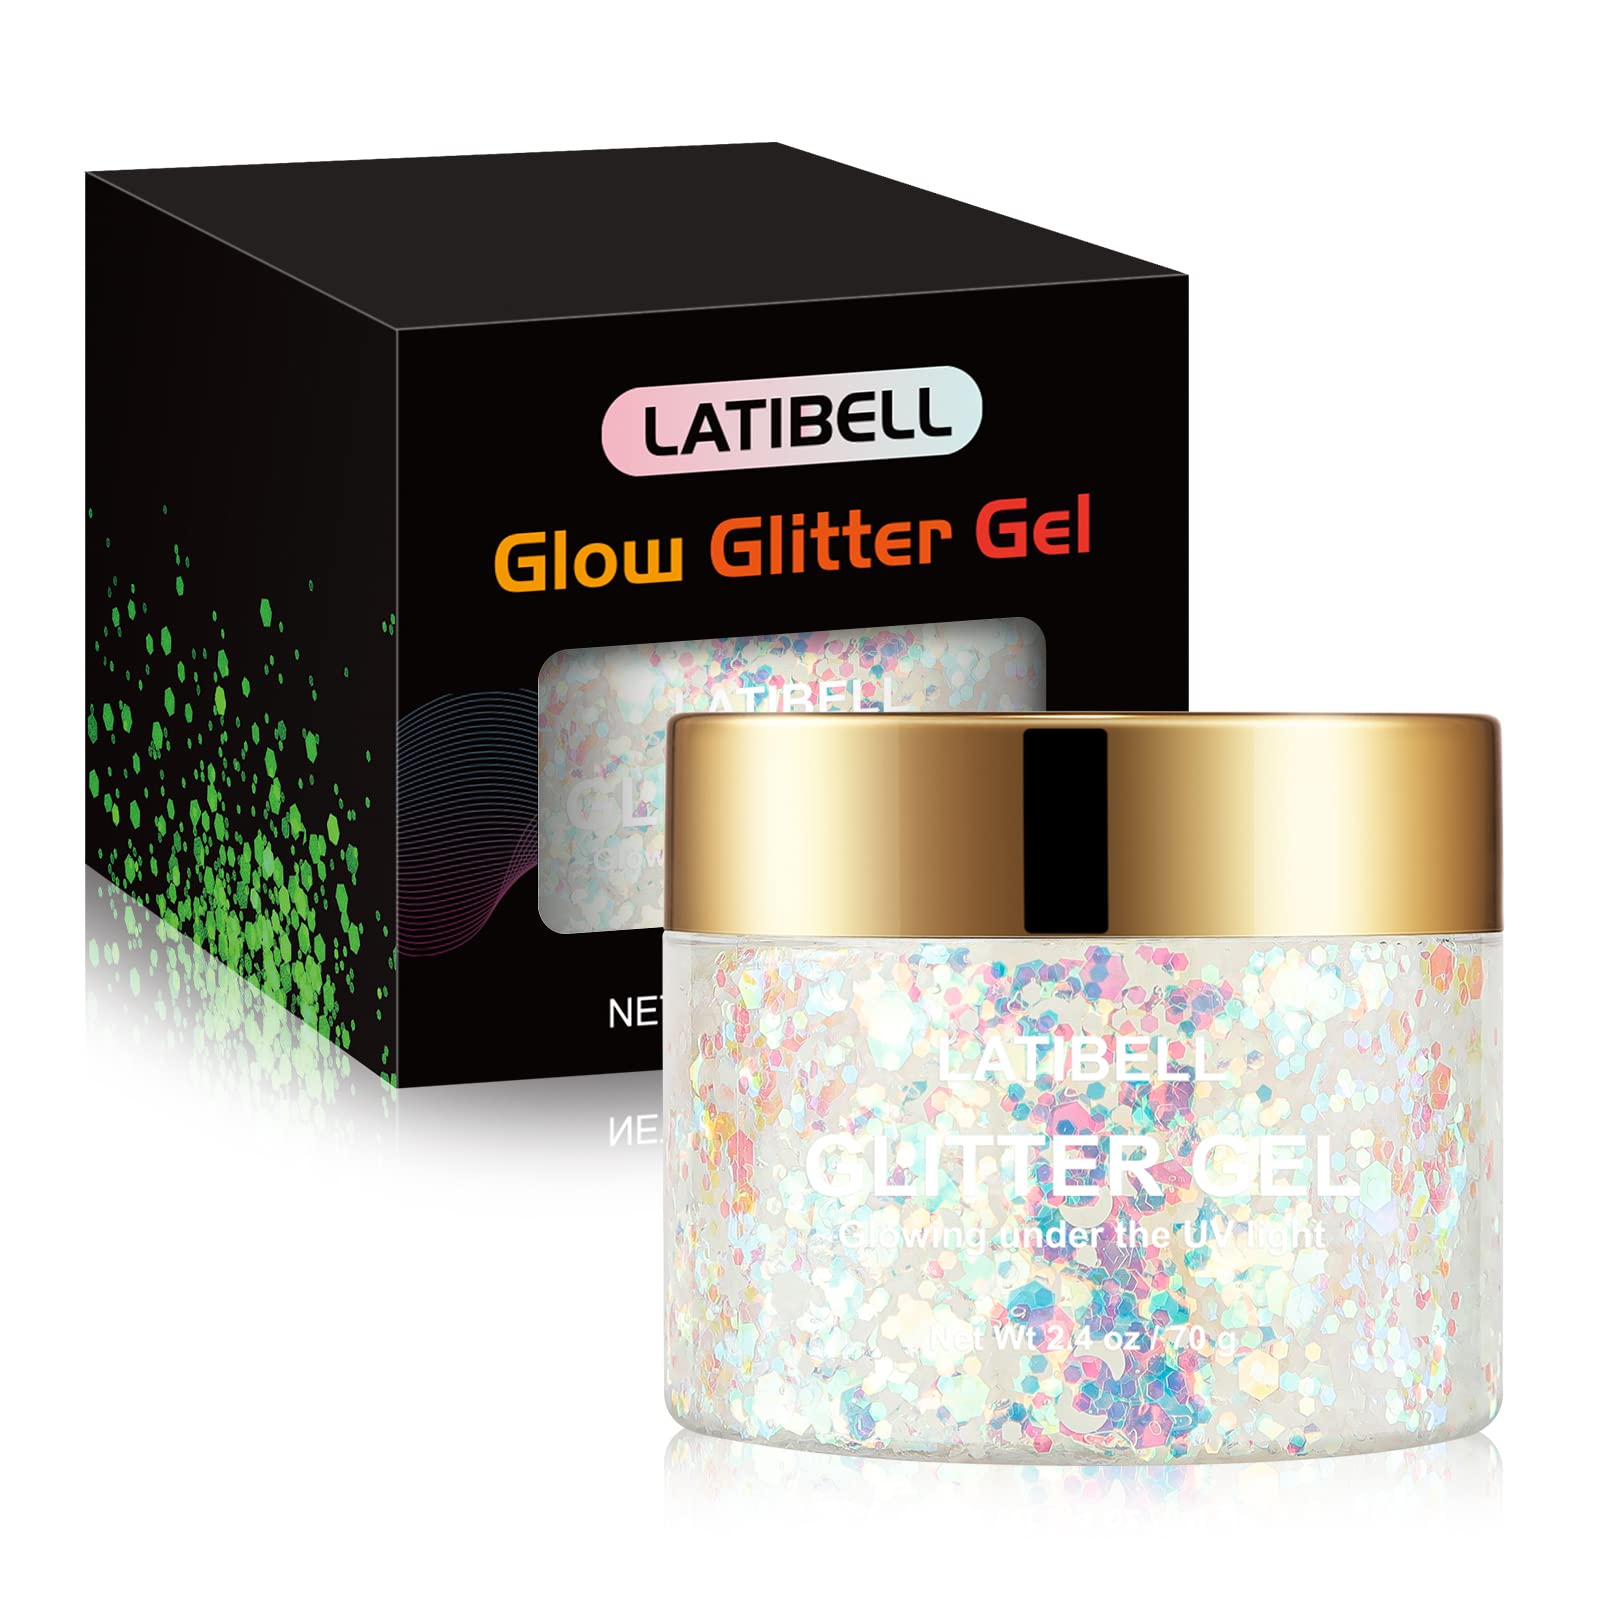 The Glow Up: The Return Of The Body Glitter Trend